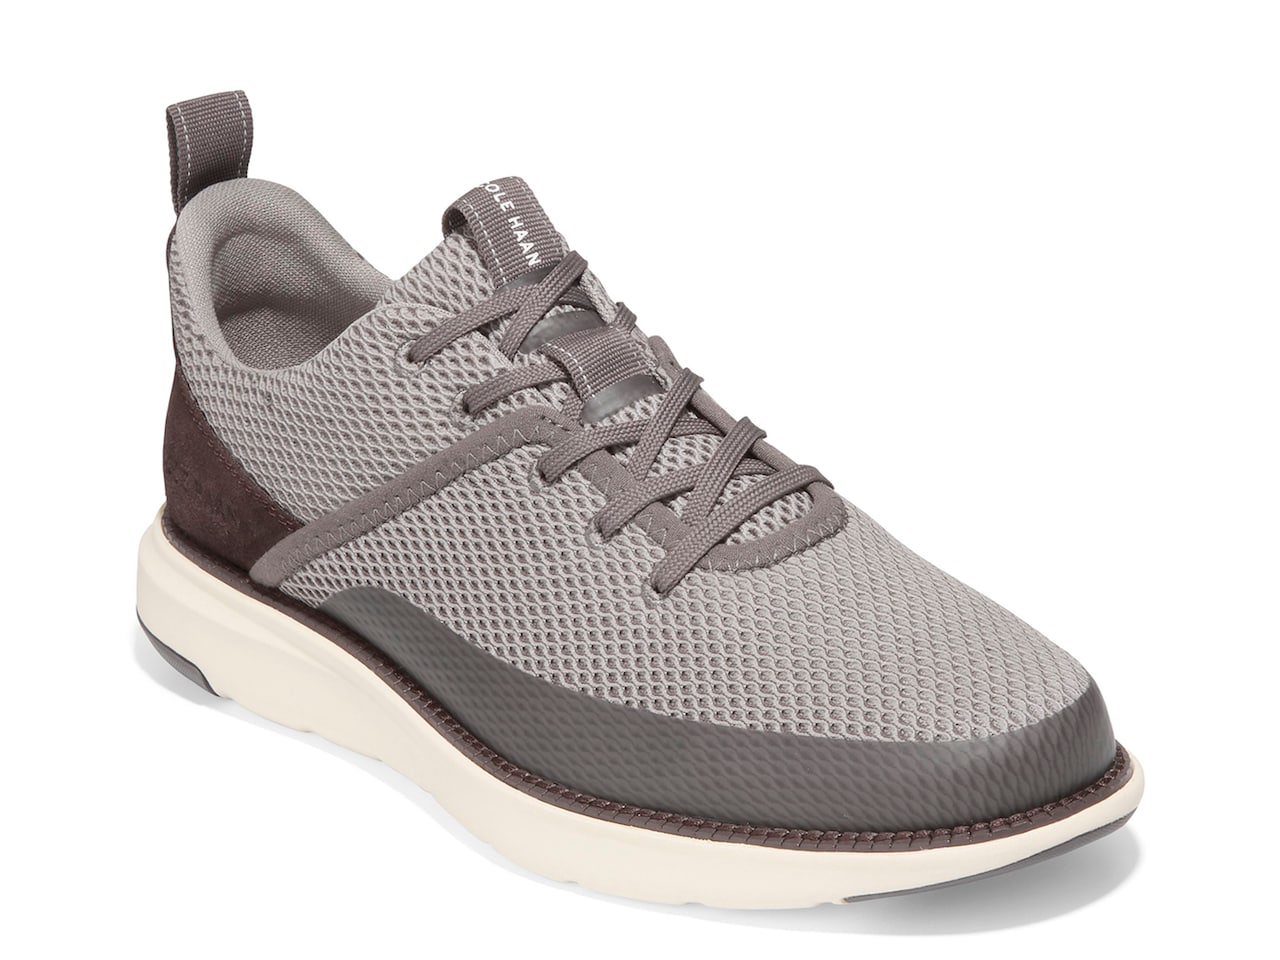 Cole Haan Men's Grand Atlantic Shoes (Grey) $55 + Free Shipping